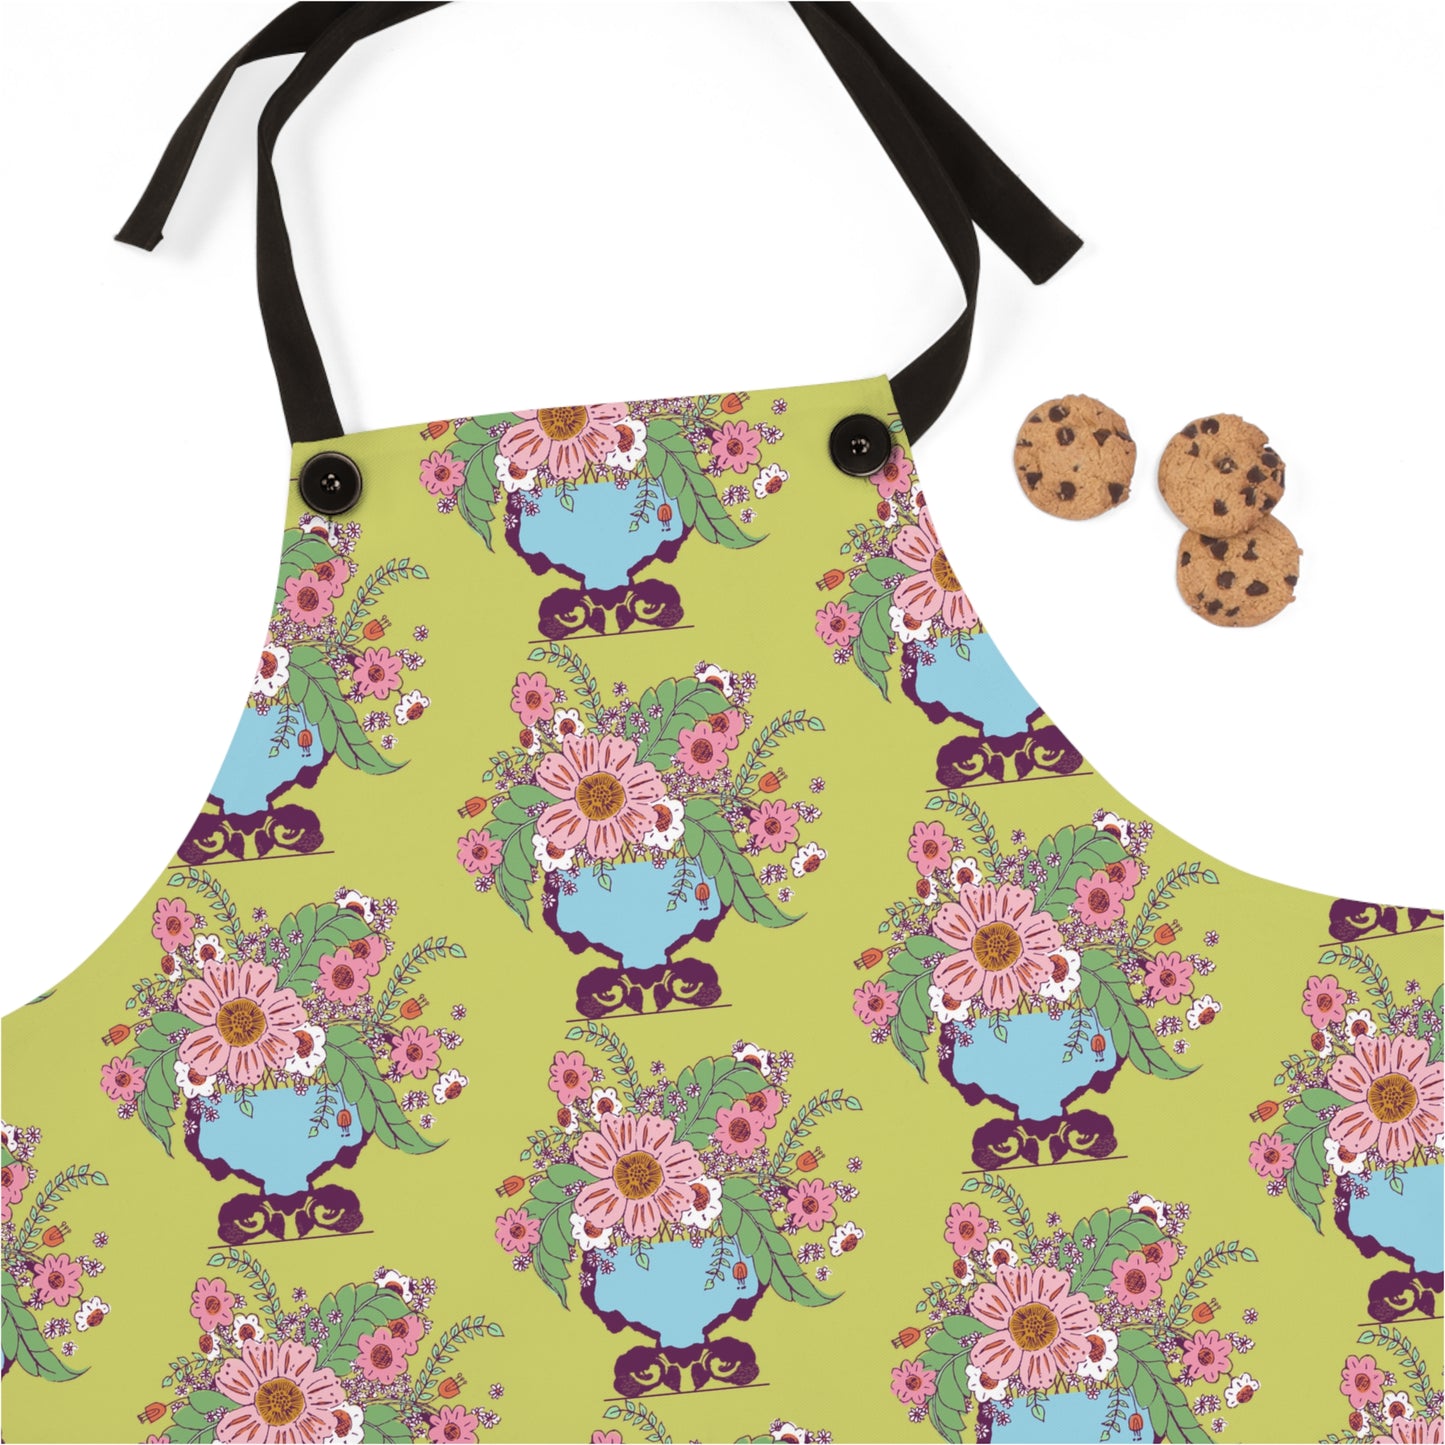 Cheerful Watercolor Flowers in Vase on Bright Green Apron